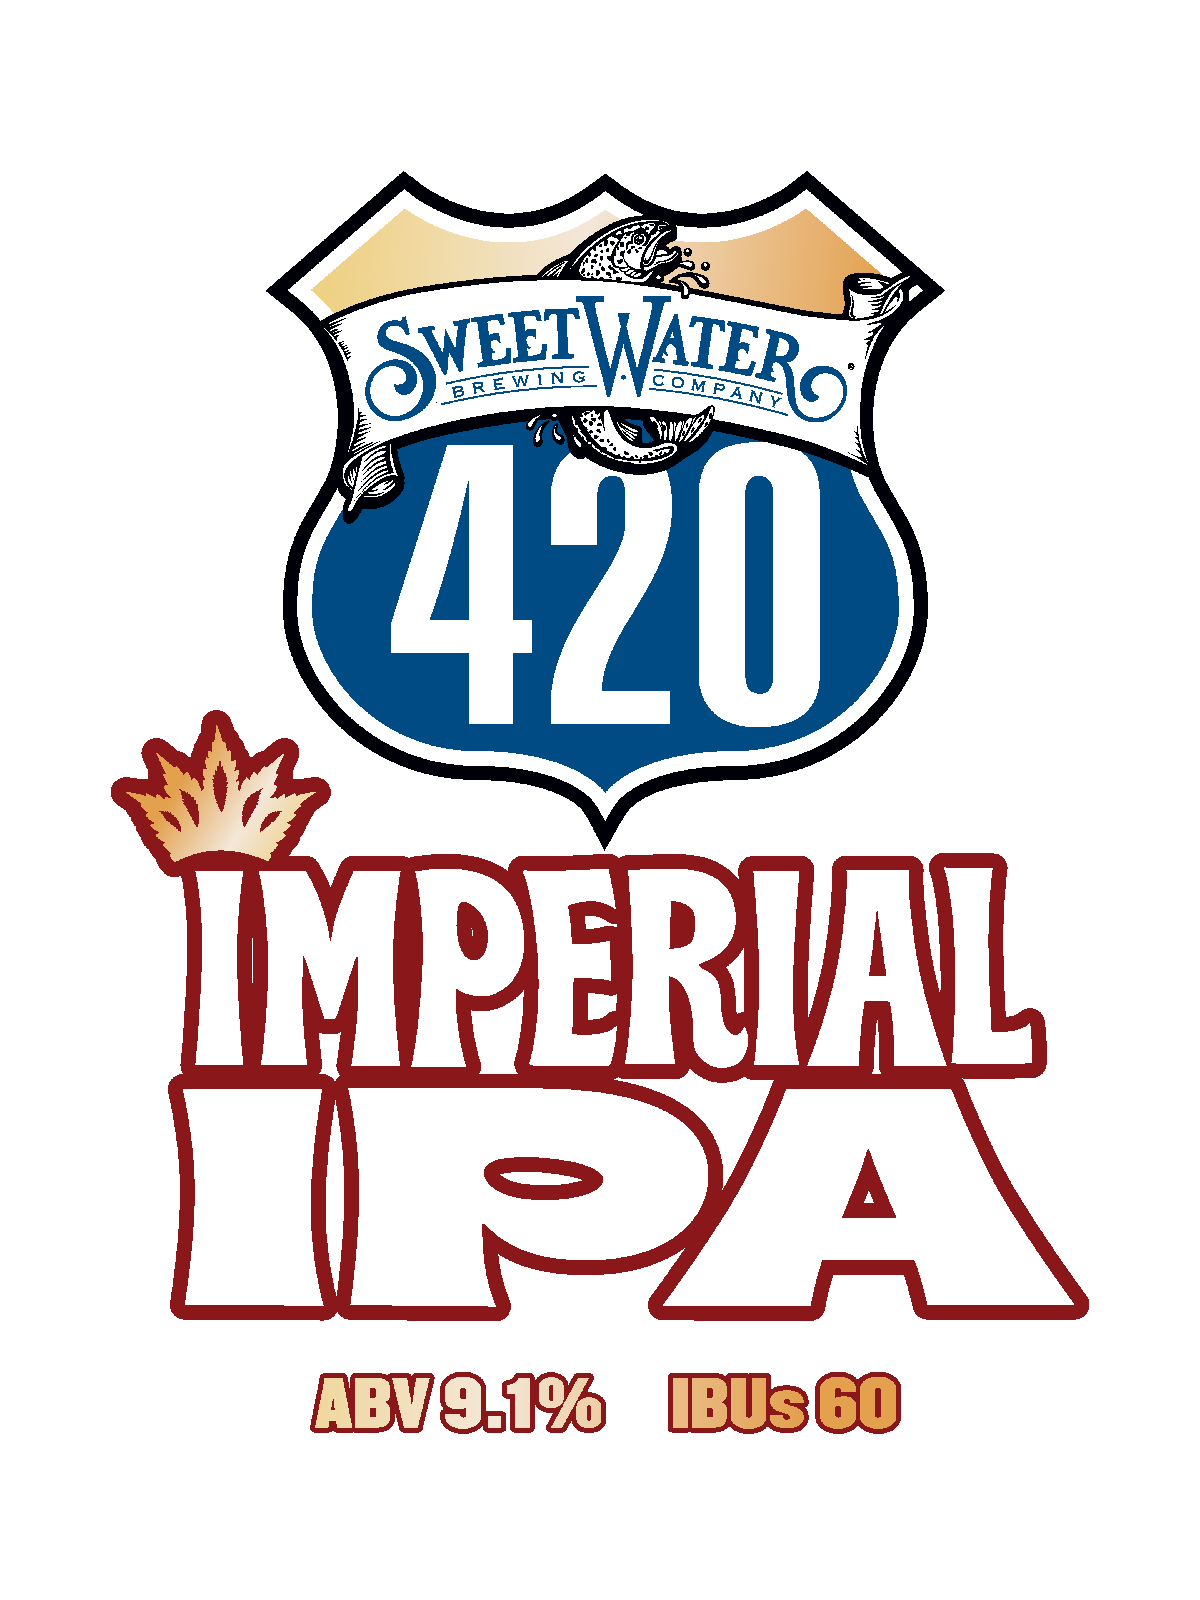 SWEETWATER 420 IMPERIAL IPA